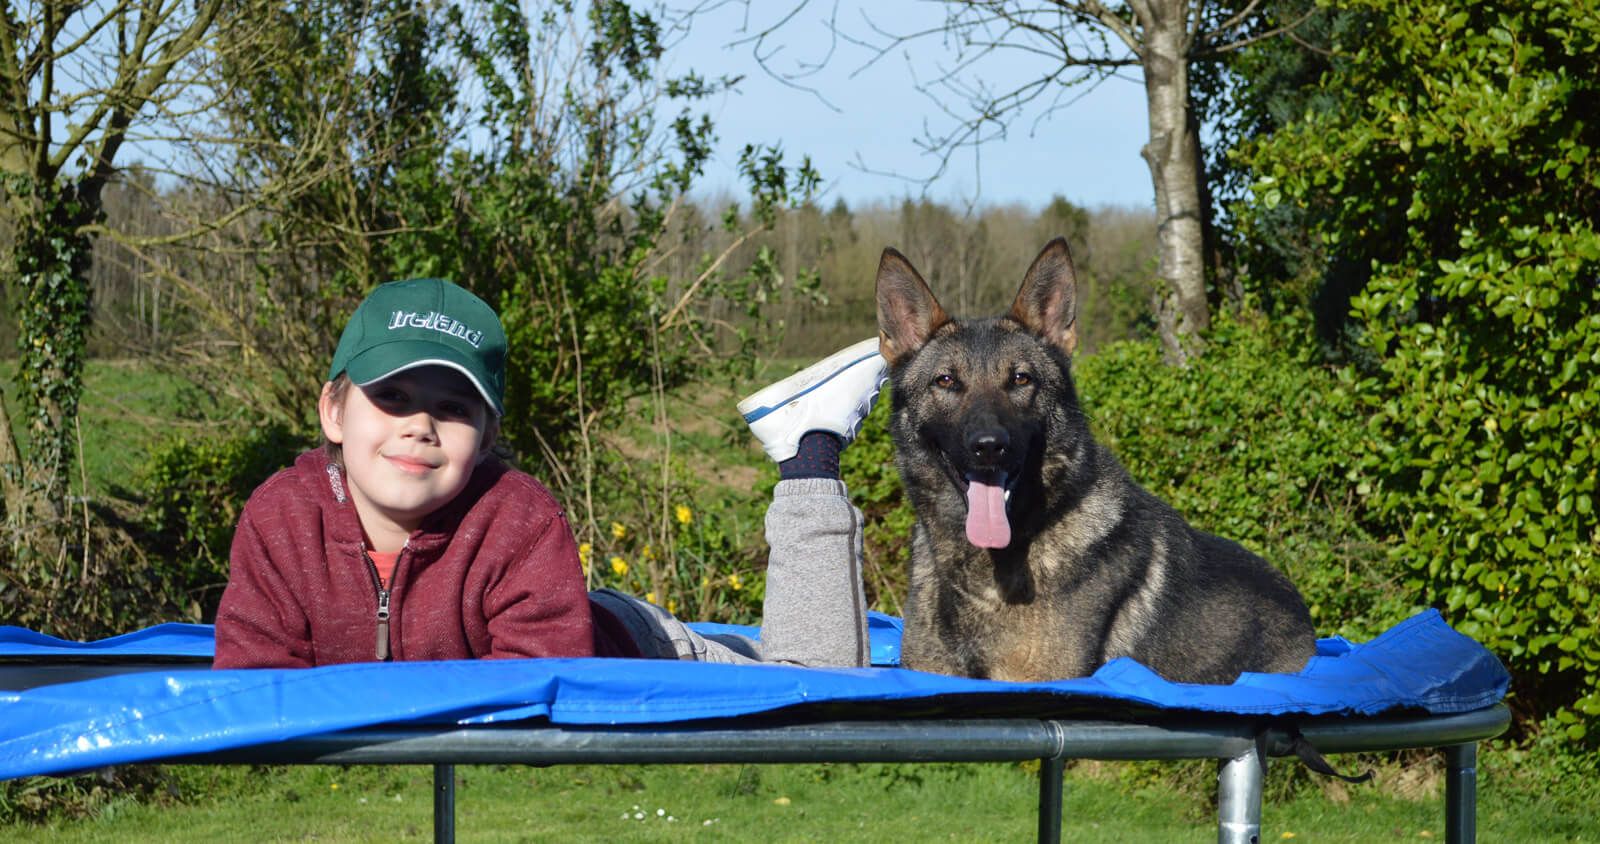 Protection dogs for families with children